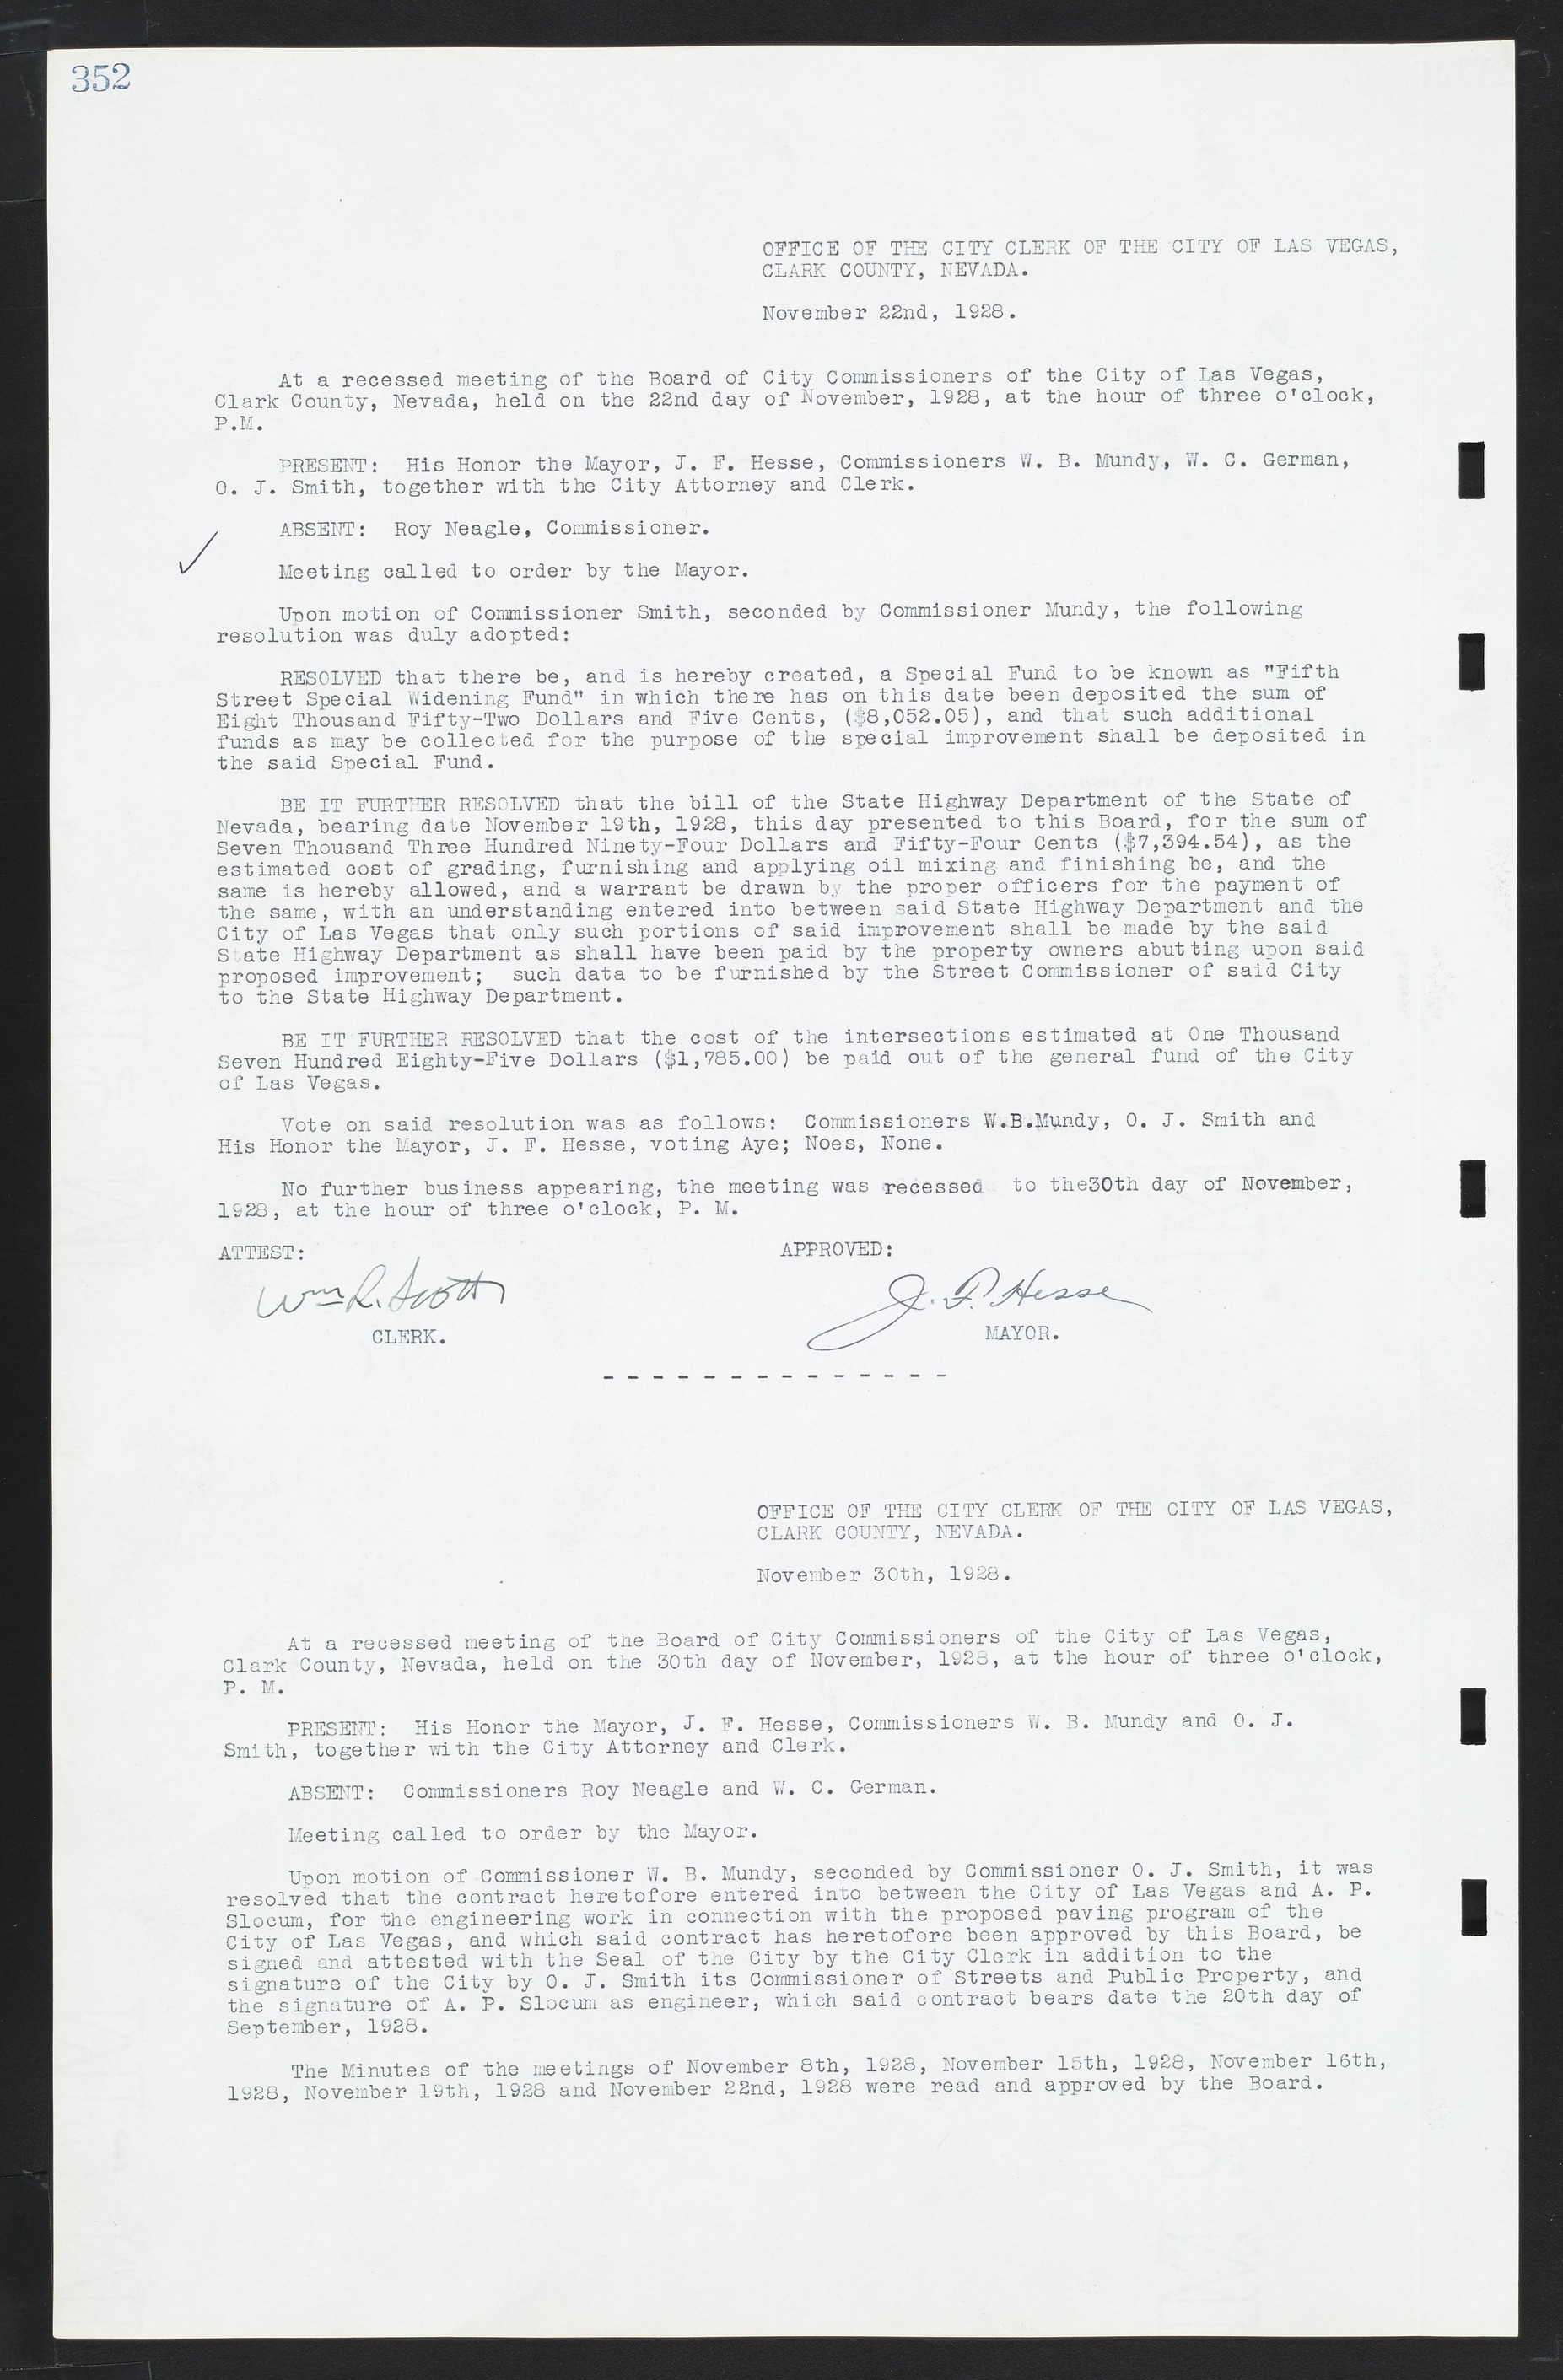 Las Vegas City Commission Minutes, March 1, 1922 to May 10, 1929, lvc000002-361